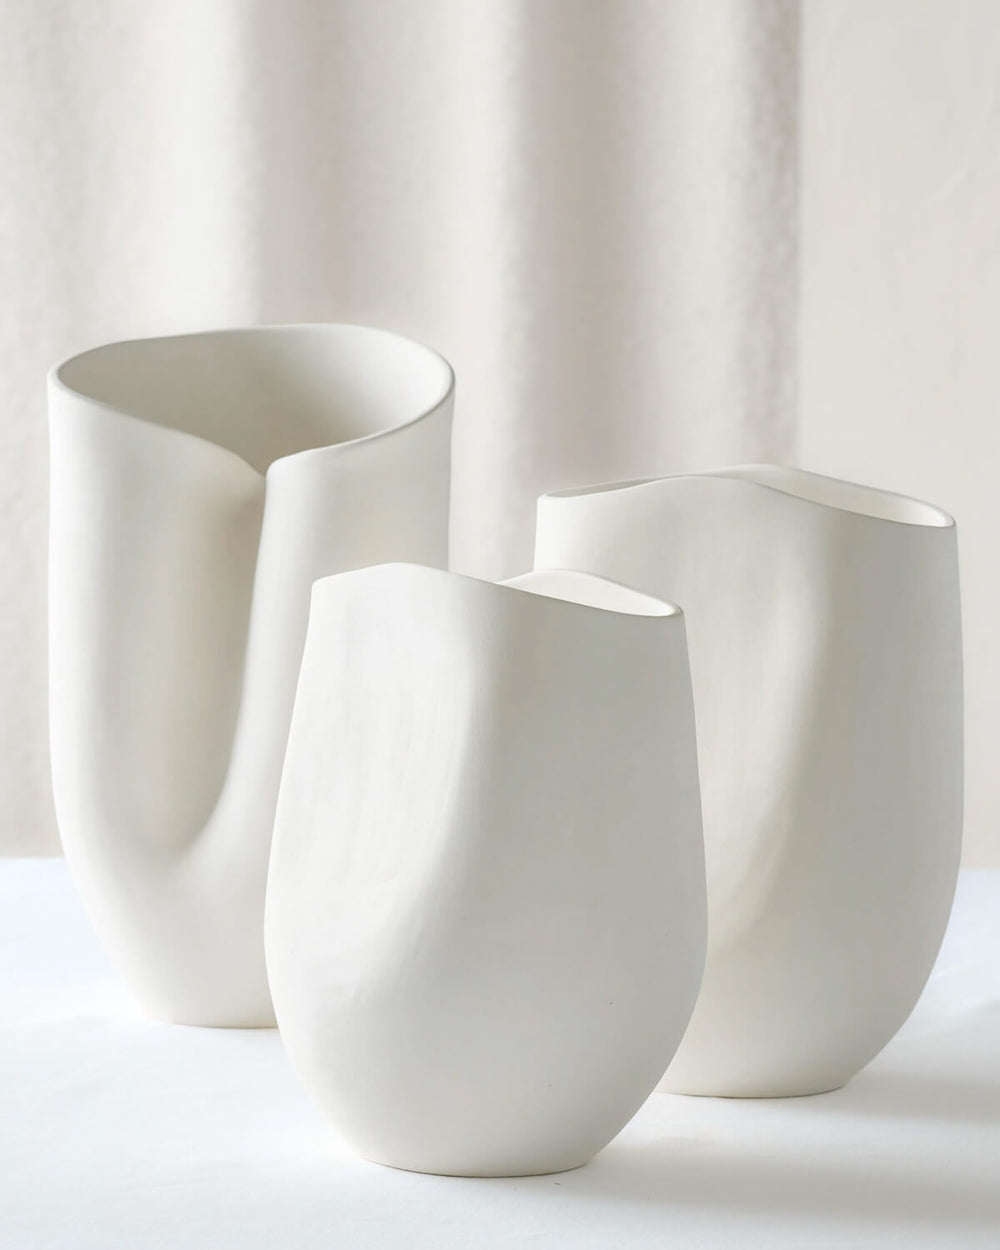 Zoya Terracotta Vases by Fairkind. Raw white clay vases with curved sculptural designs, handmade in Morocco.